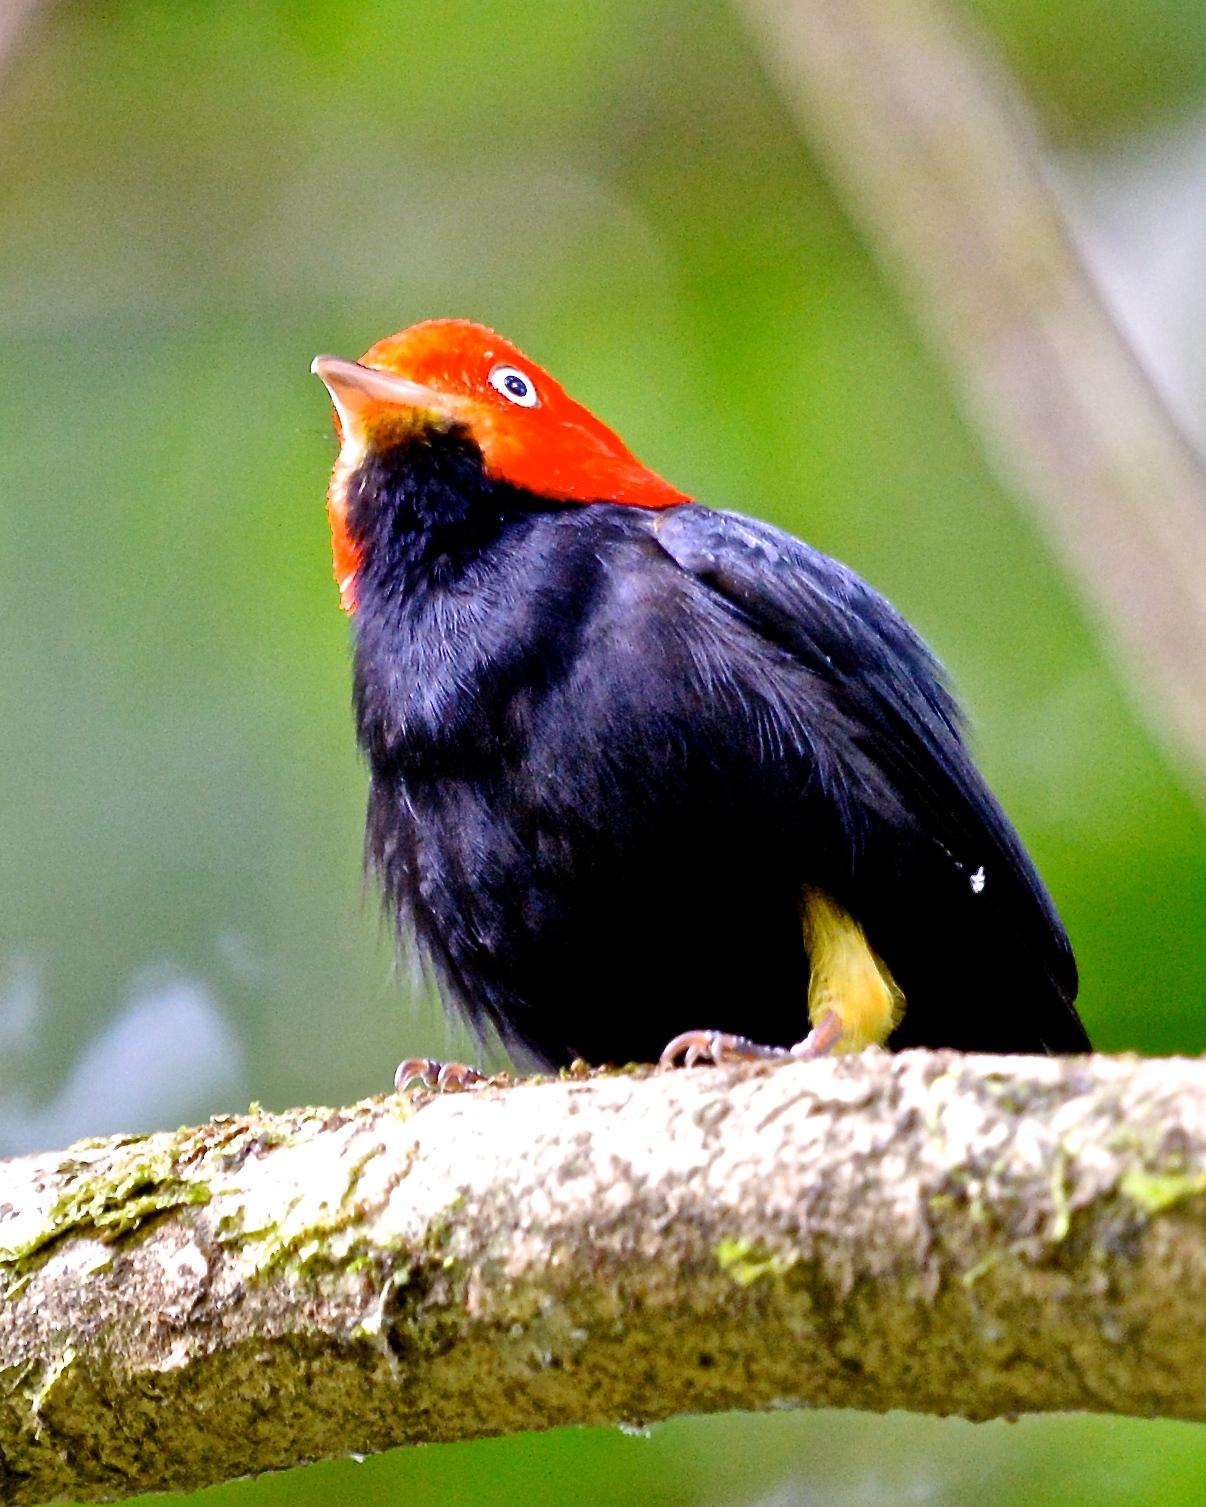 Red-capped Manakin Photo by Gerald Friesen